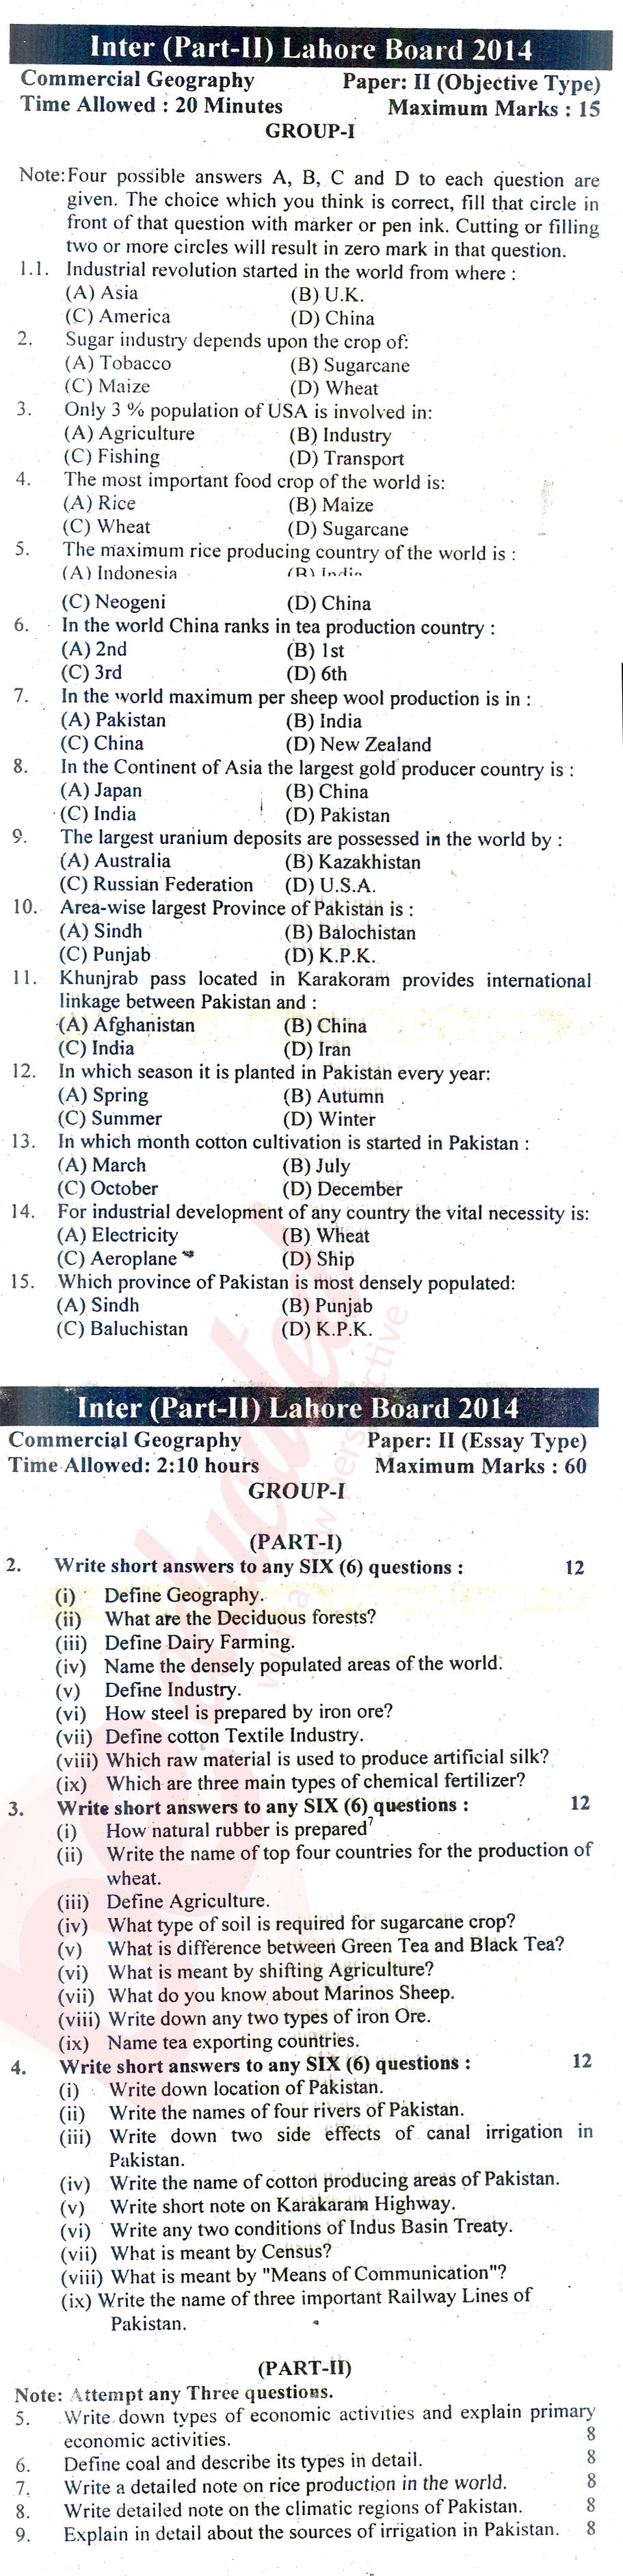 Commercial Geography ICOM Part 2 Past Paper Group 1 BISE Lahore 2014